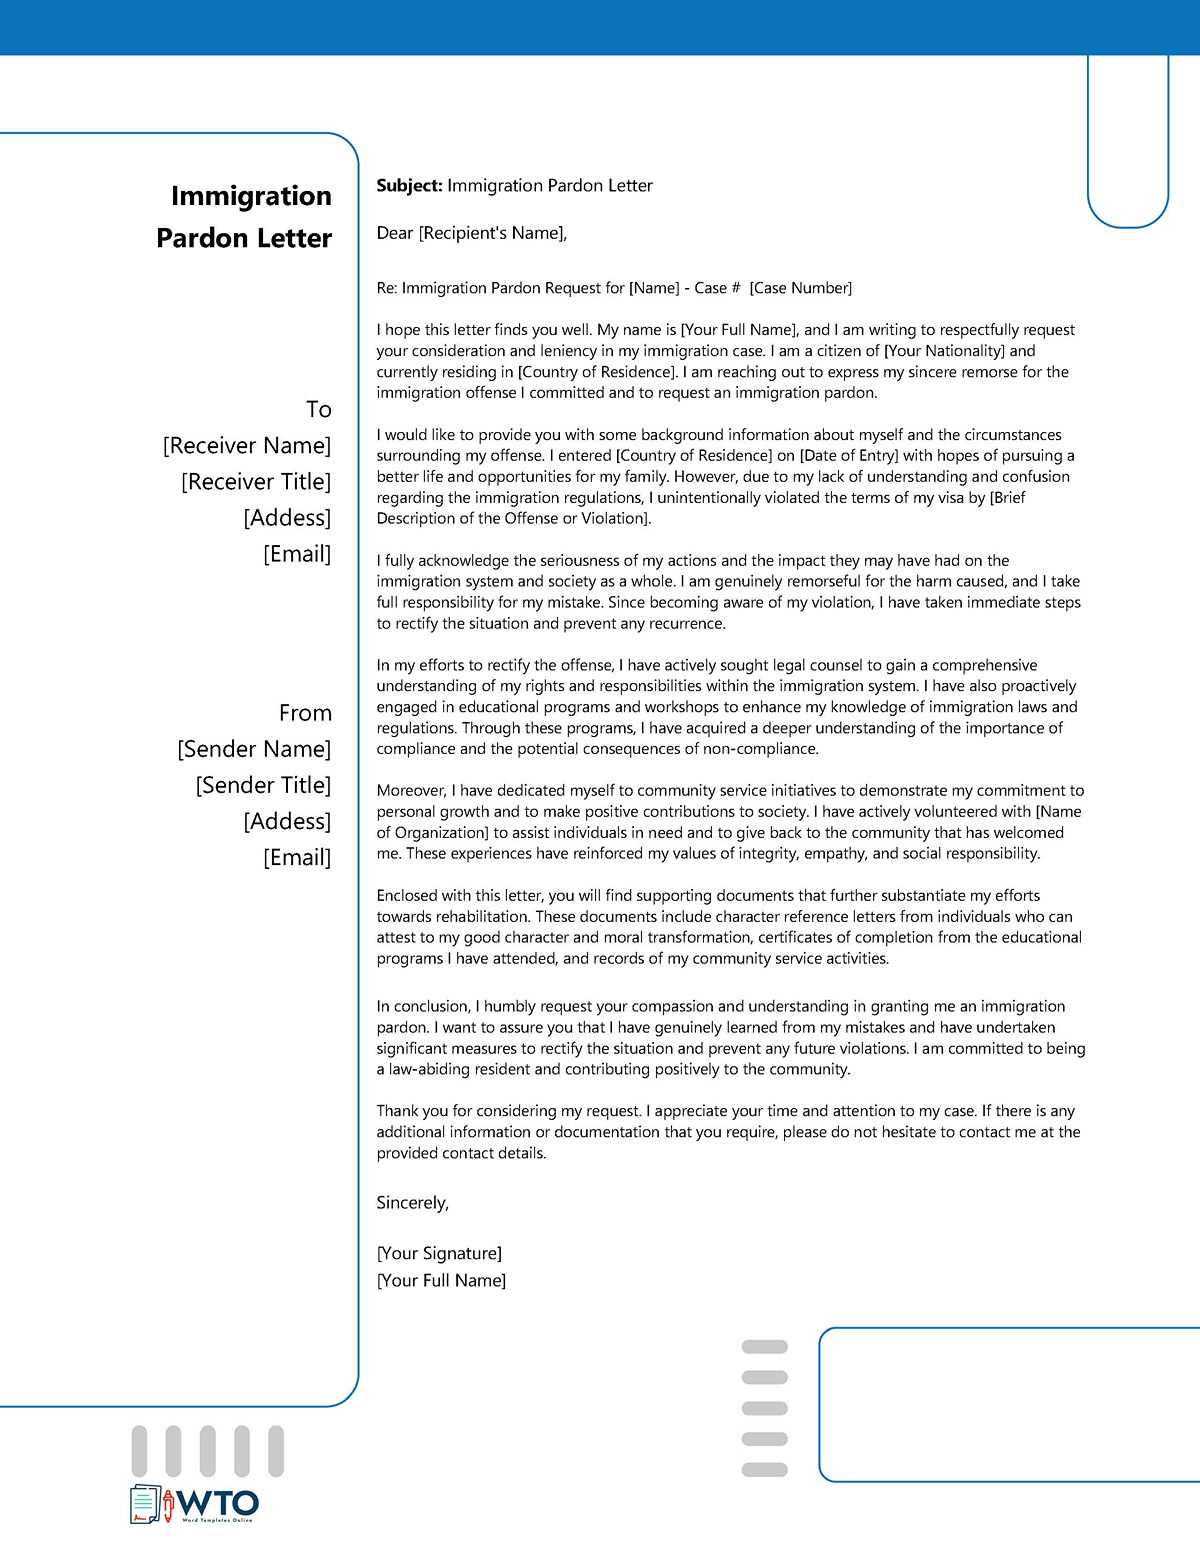 Free Immigration Pardon Letter Sample 01 for Word